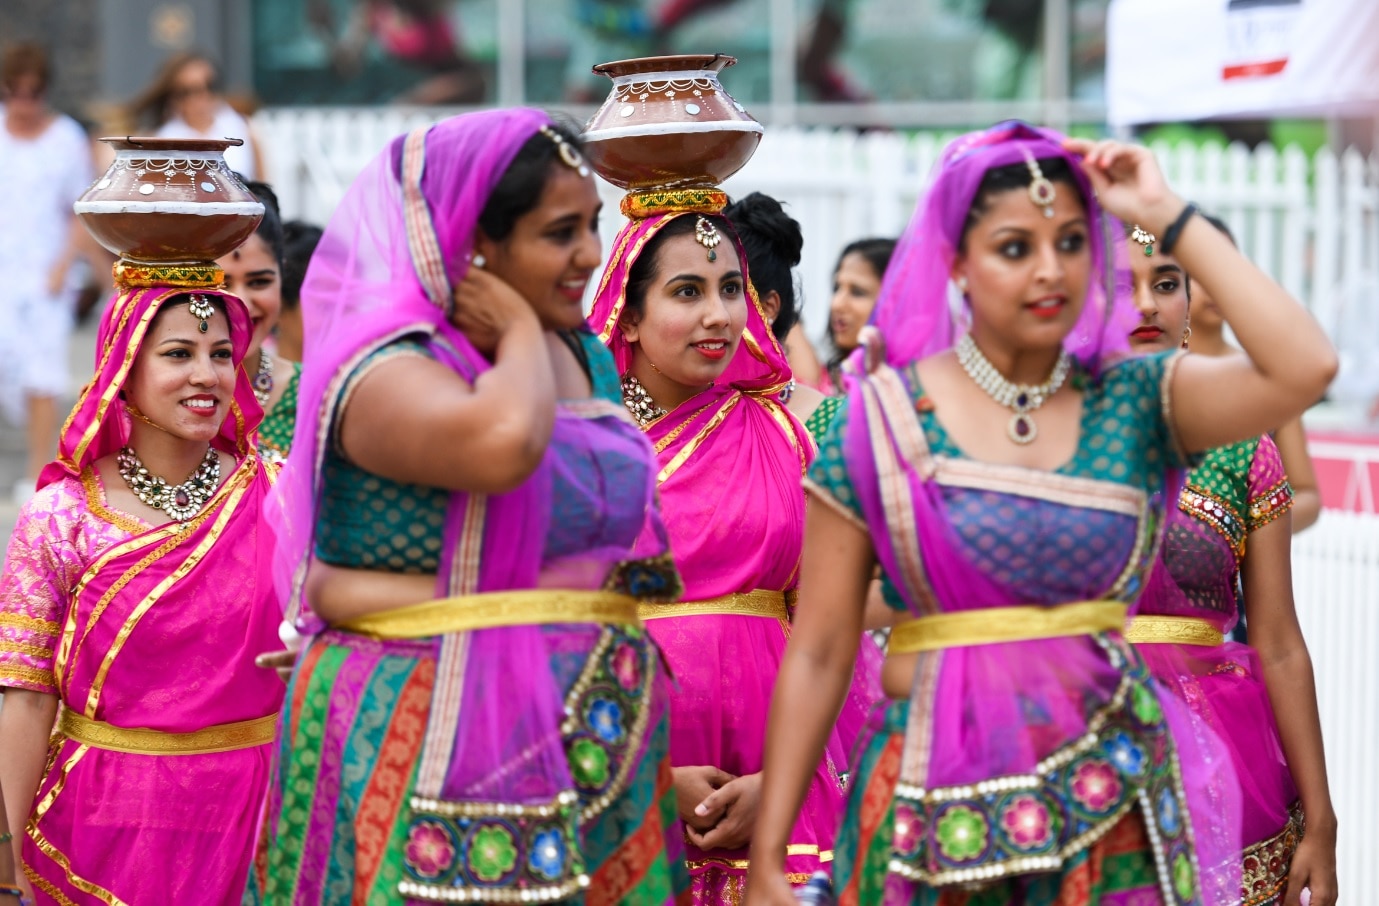 Indian dancers are seen at the Jane McGrath Day luncheon at the SCG in Sydney, Saturday, January 5, 2019.